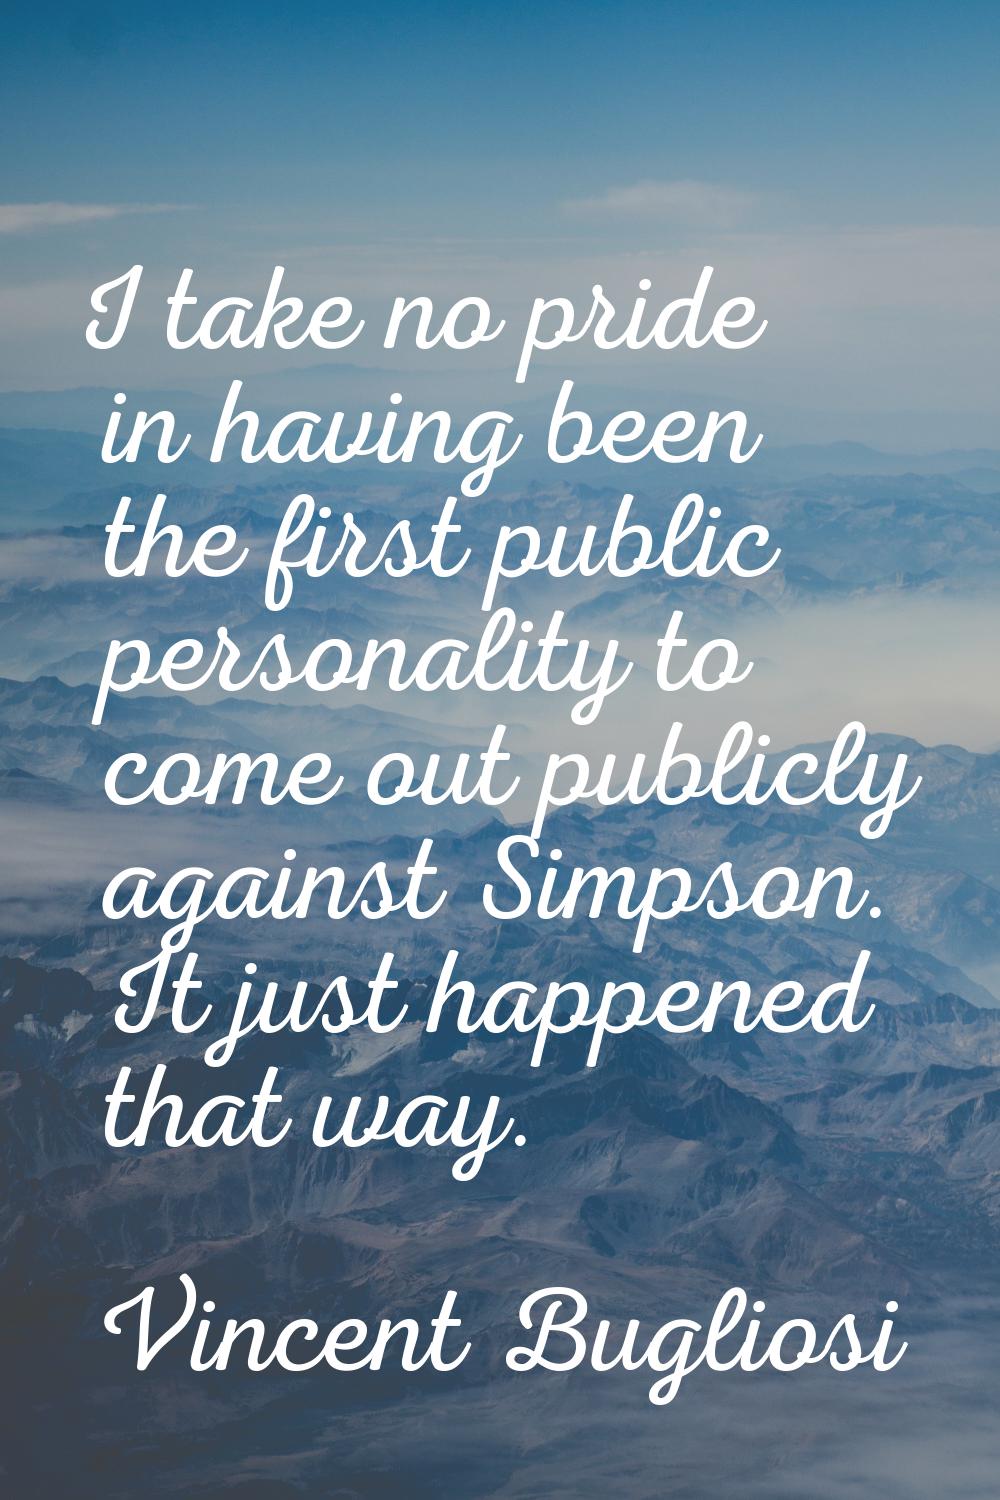 I take no pride in having been the first public personality to come out publicly against Simpson. I